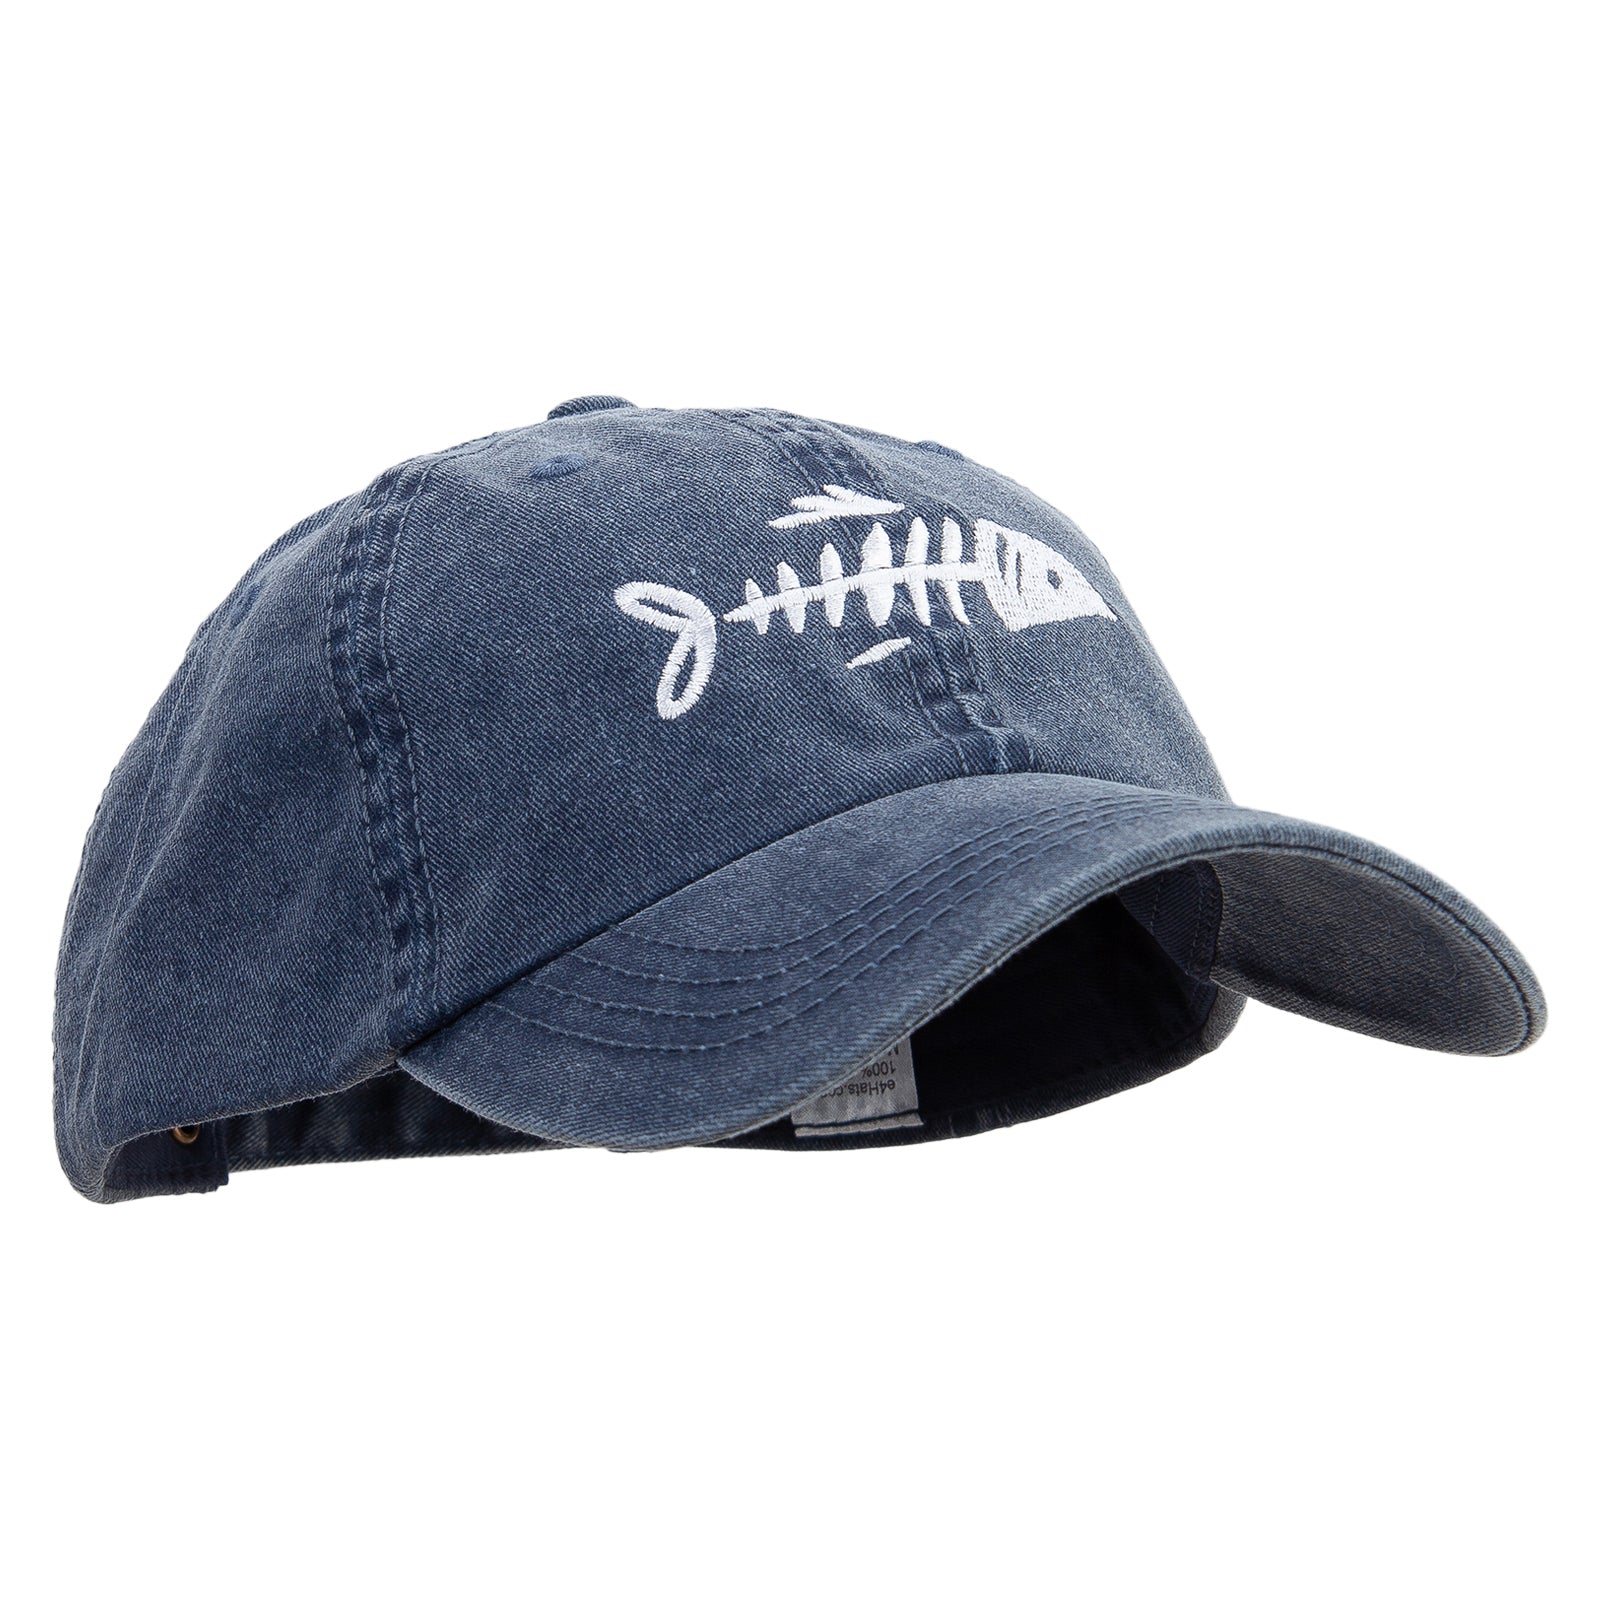 Fish Bone Embroidered Big Size Washed Pigment Dyed Cap, Leisure Designed